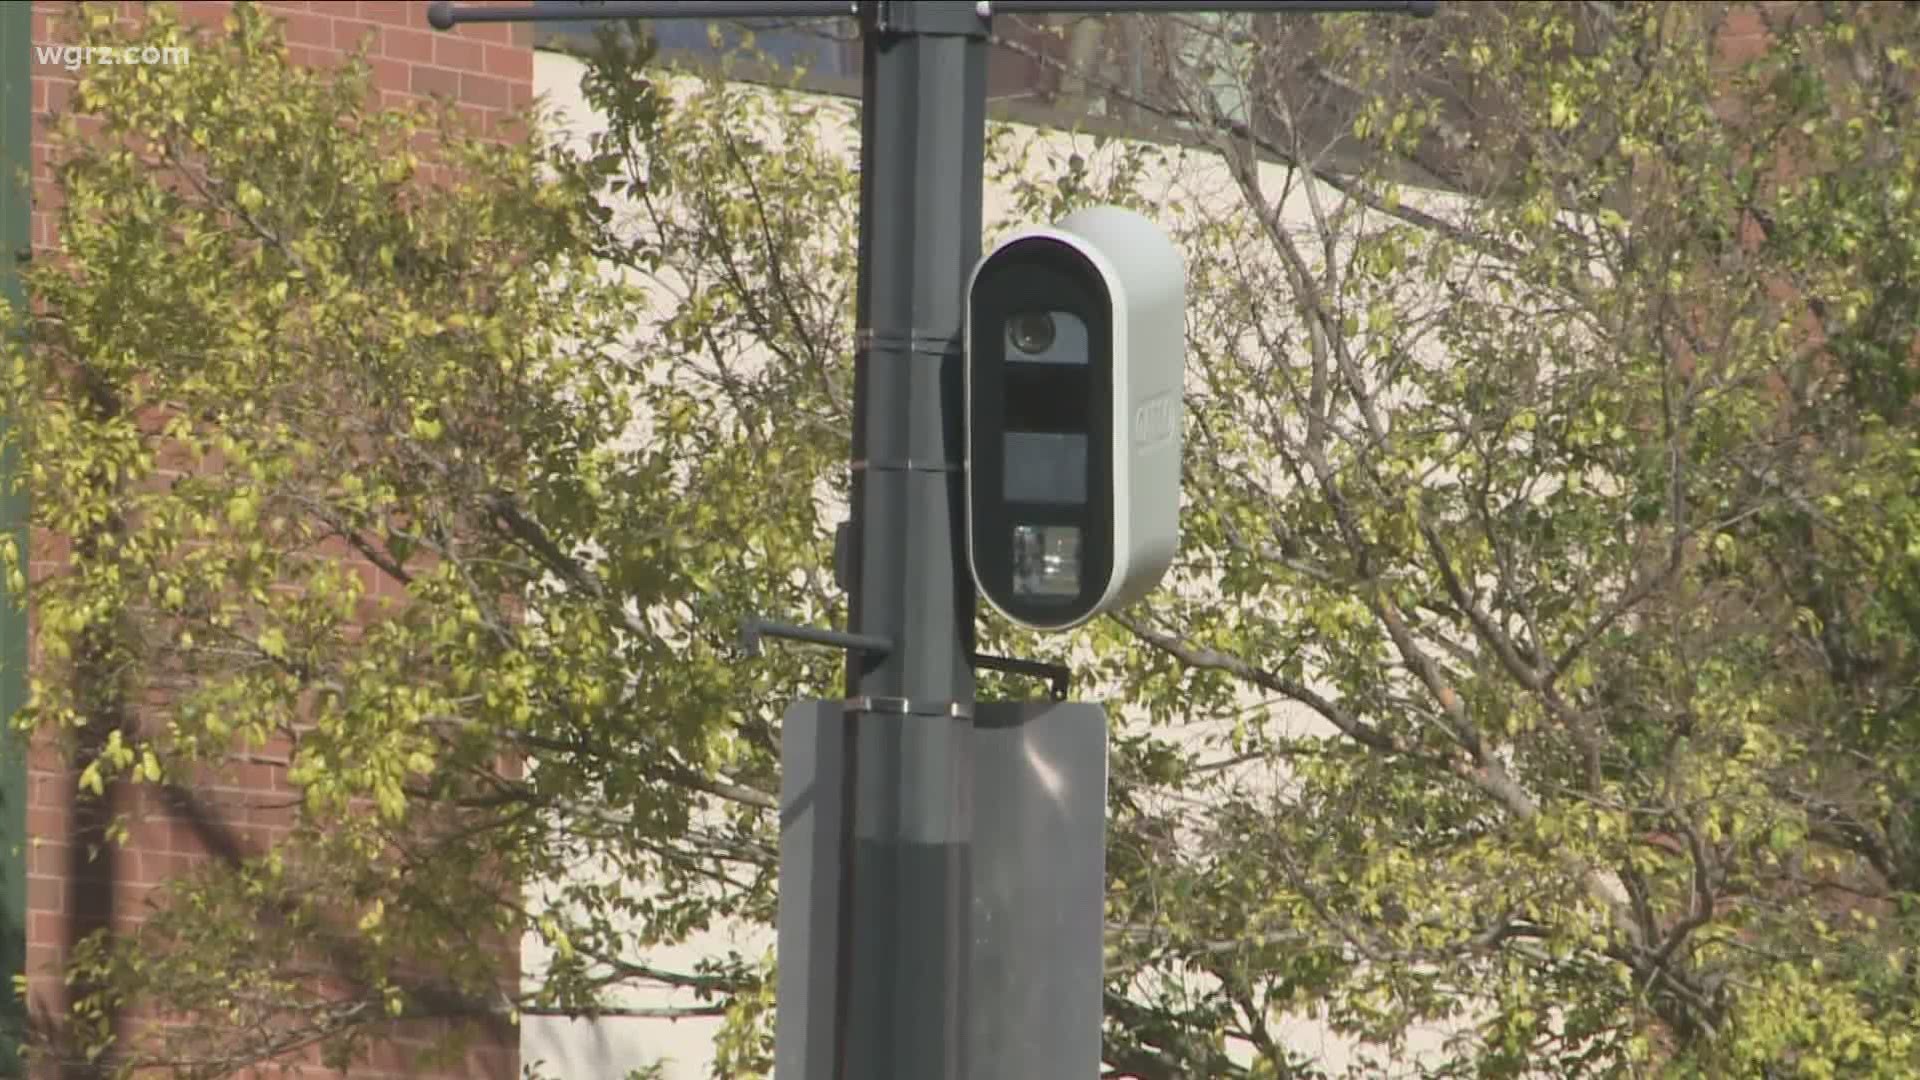 More complaints over Buffalo speed cameras